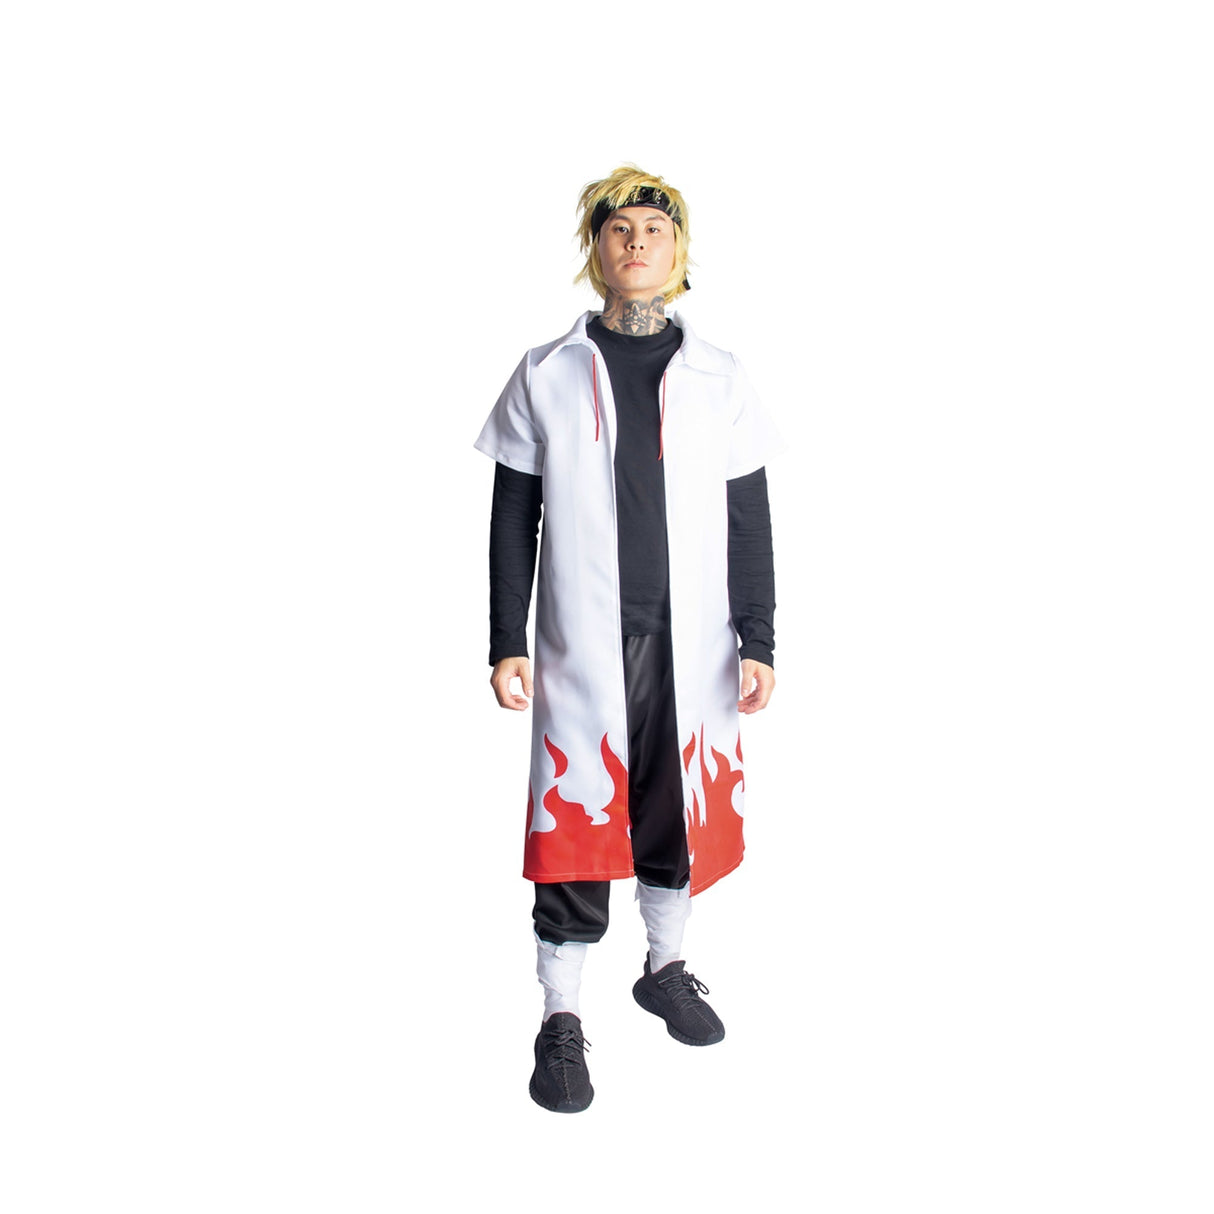 Quanzhou Walson Imp & Exp Co., Ltd. Costumes Naruto Chief of the Village Anime Costume for Adults 810077654729